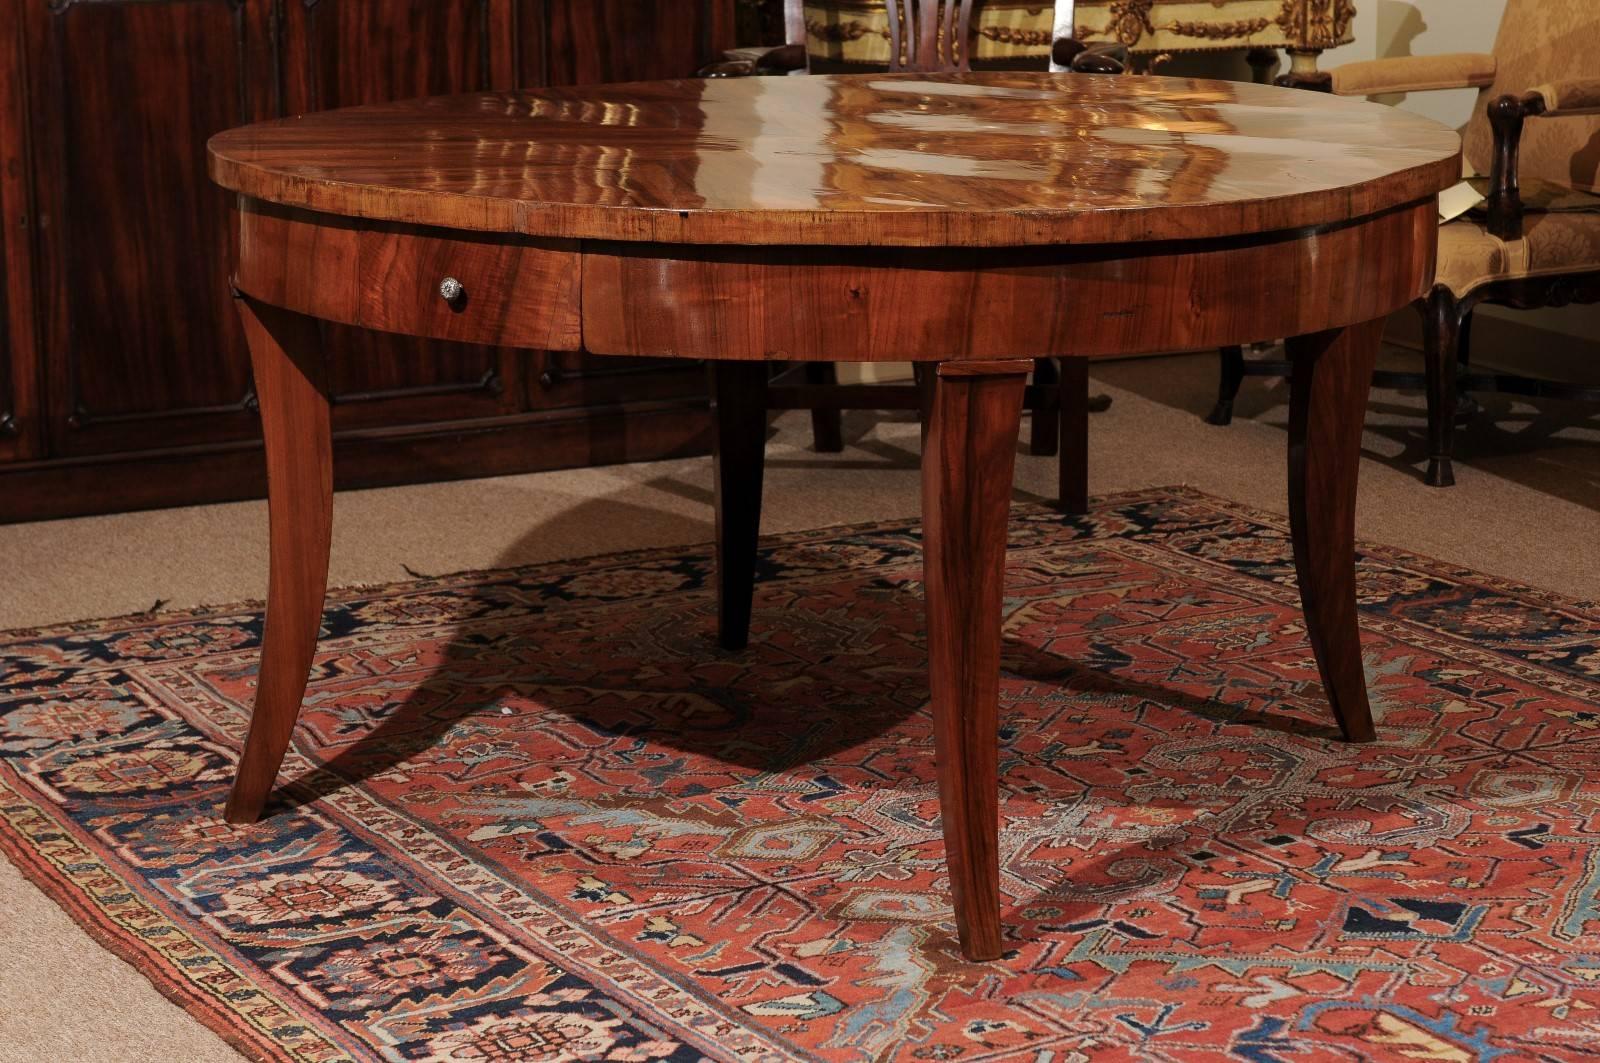 Large 19th century Italian walnut round dining or center table with small drawer in frieze and four graceful down-swept legs.